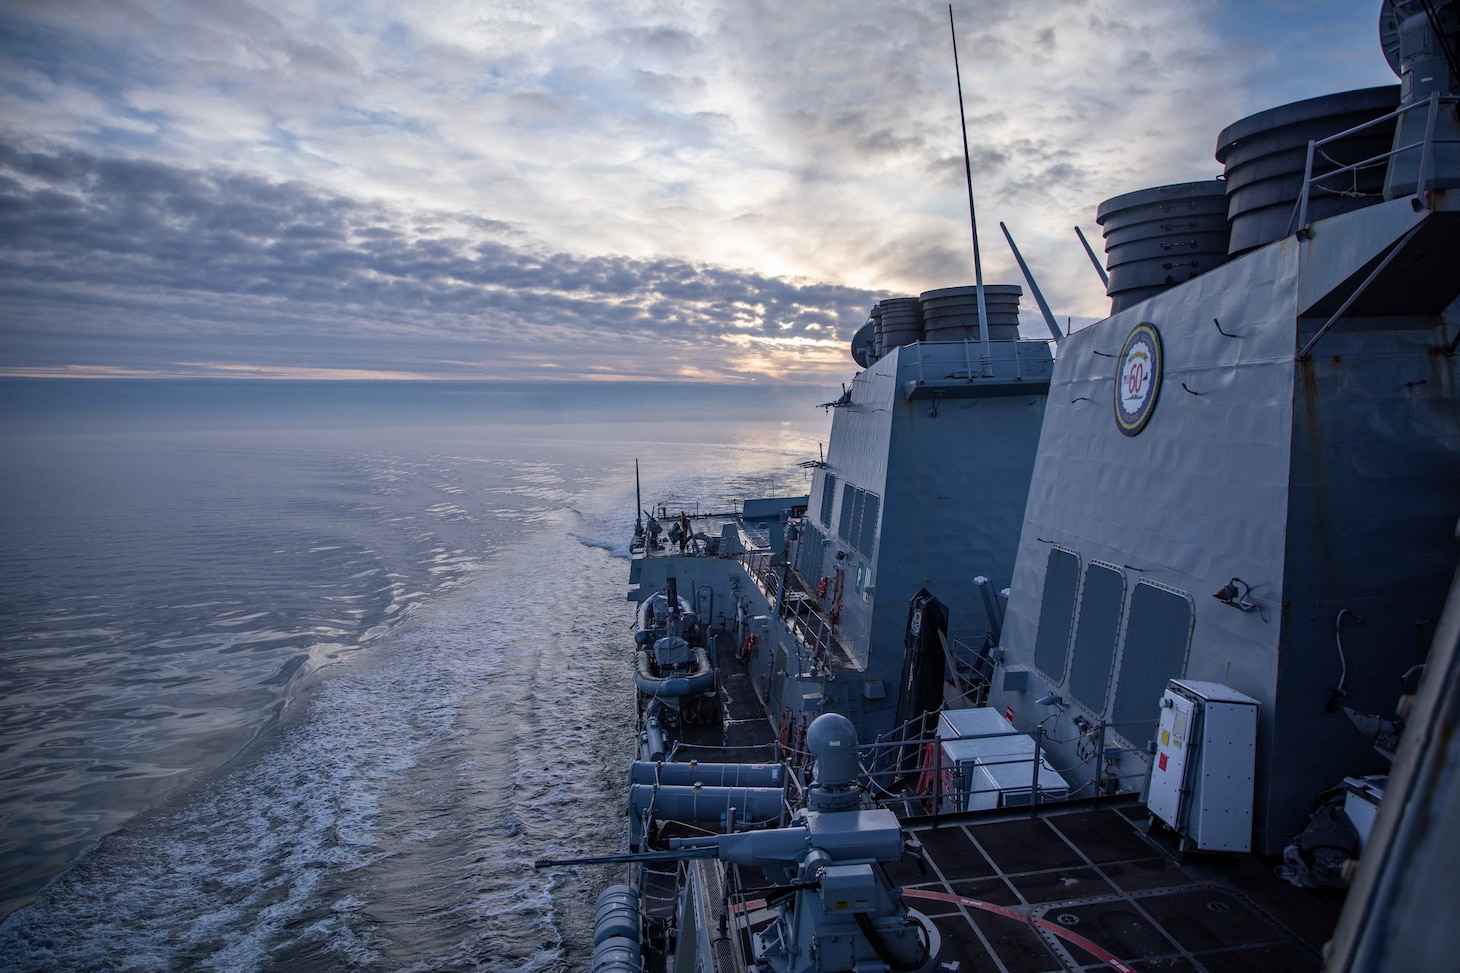 GULF OF RIGA (Jan. 20, 2023) The Arleigh Burke-class guided-missile destroyer USS Roosevelt (DDG 80) transits the Gulf of Riga, Jan. 20, 2023. Roosevelt is on a scheduled deployment in the U.S. Naval Forces Europe area of operations, employed by U.S. Sixth Fleet to defend U.S., allied and partner interests. (U.S. Navy photo by Mass Communication Specialist 2nd Class Danielle Baker/Released)